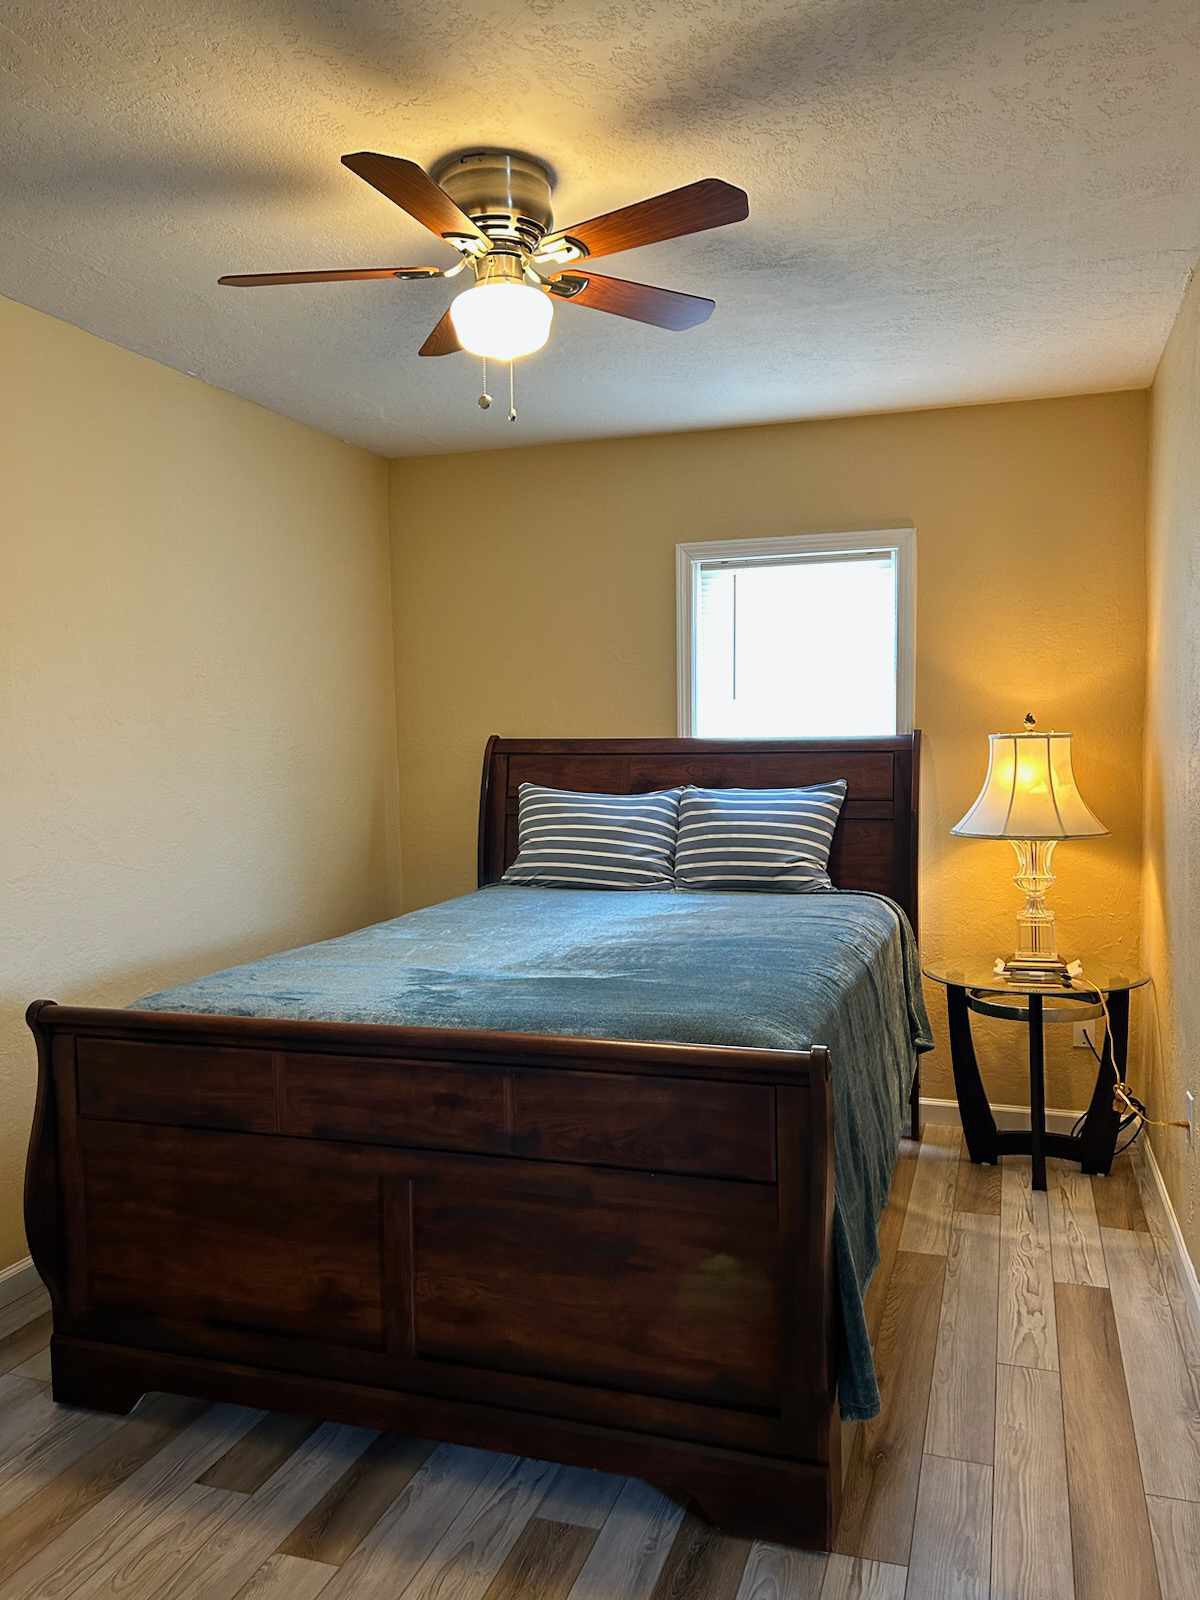 #9 Cute and cozy apartment minutes to Ft. Sill